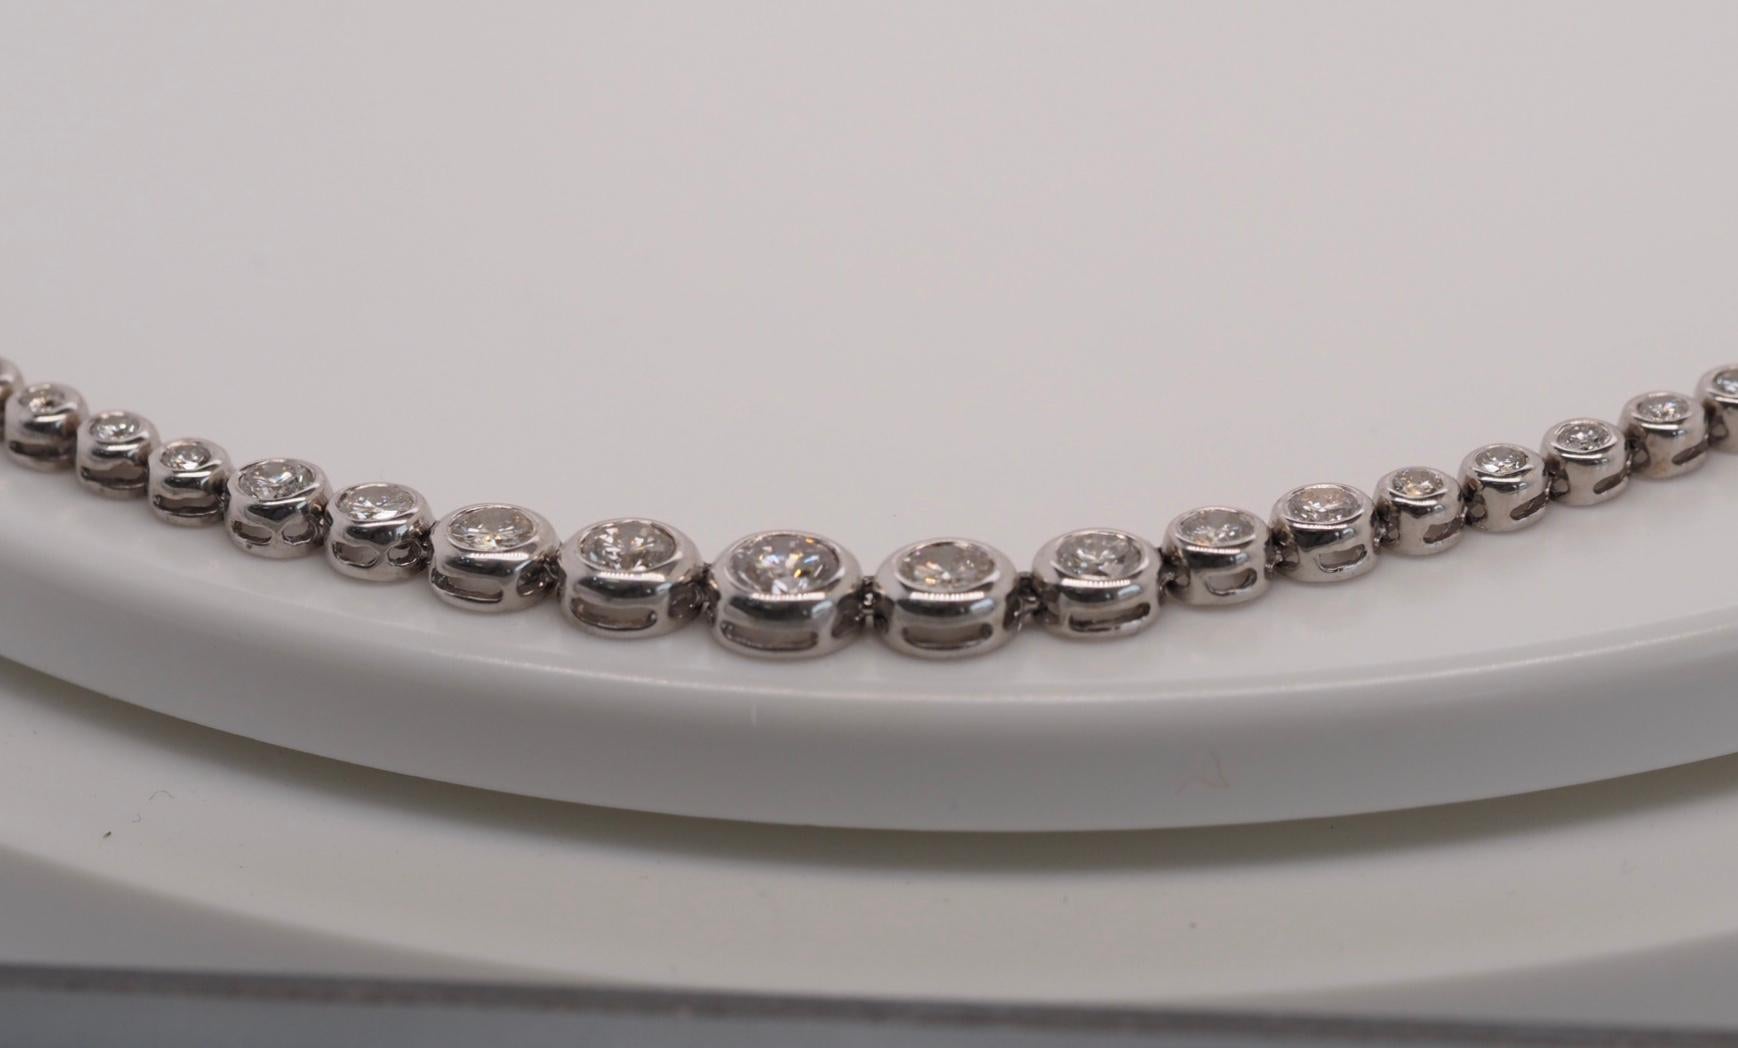 This stunning 14 Karat White Gold Round Brilliant Cut Diamond Tennis Necklace includes 103 individually bezel set diamonds with a total of 7 carats. They taper in size from top to bottom from 1.9mm to a 4.9mm.  The closure is a tongue in groove with